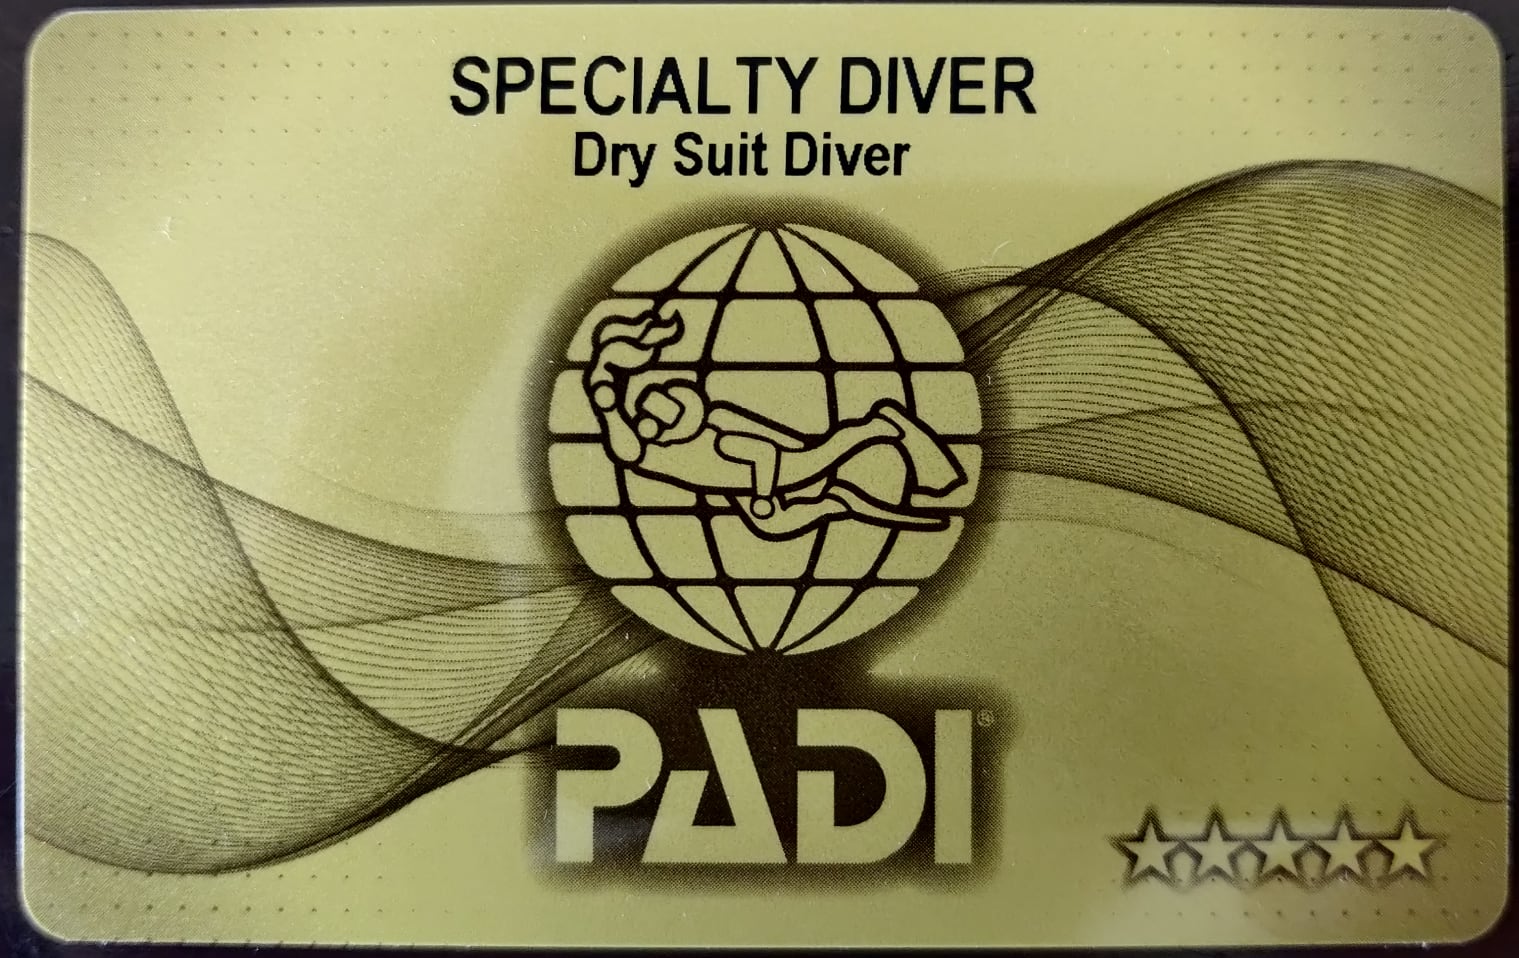 Dry suit specialty